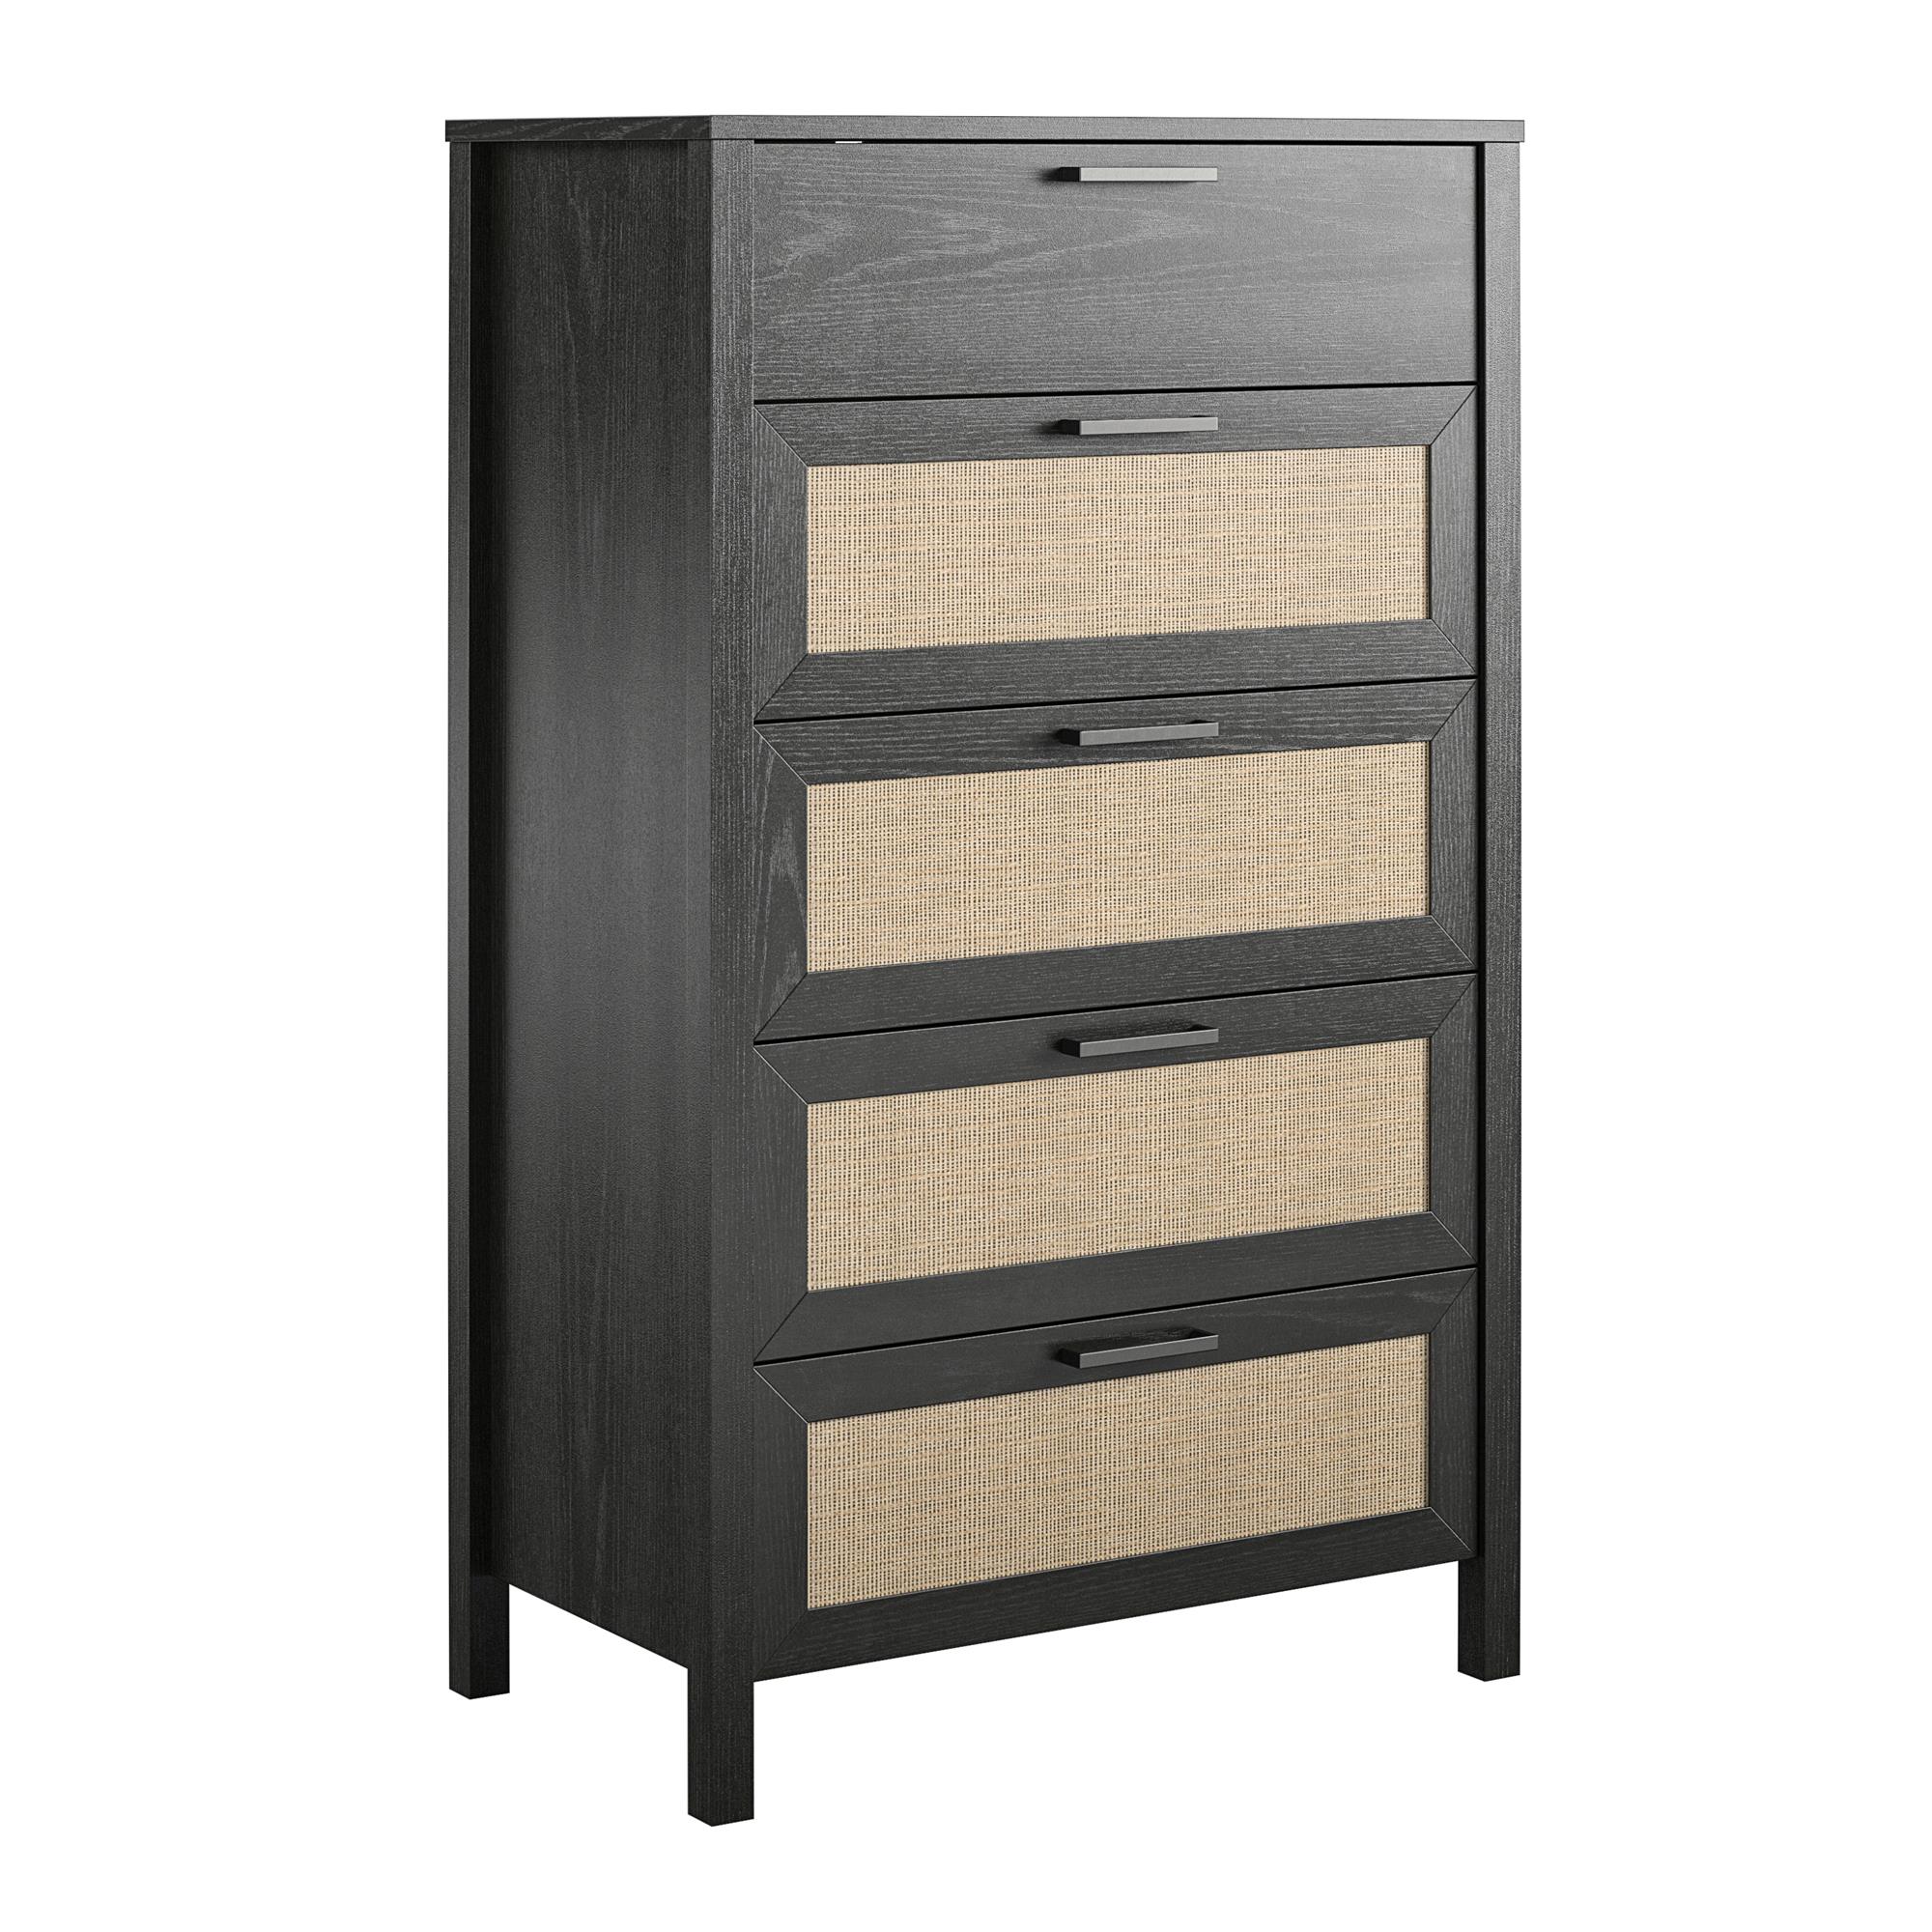 Ameriwood Home Wimberly 5-Drawer Dresser, Black Oak with Faux Rattan - image 4 of 14